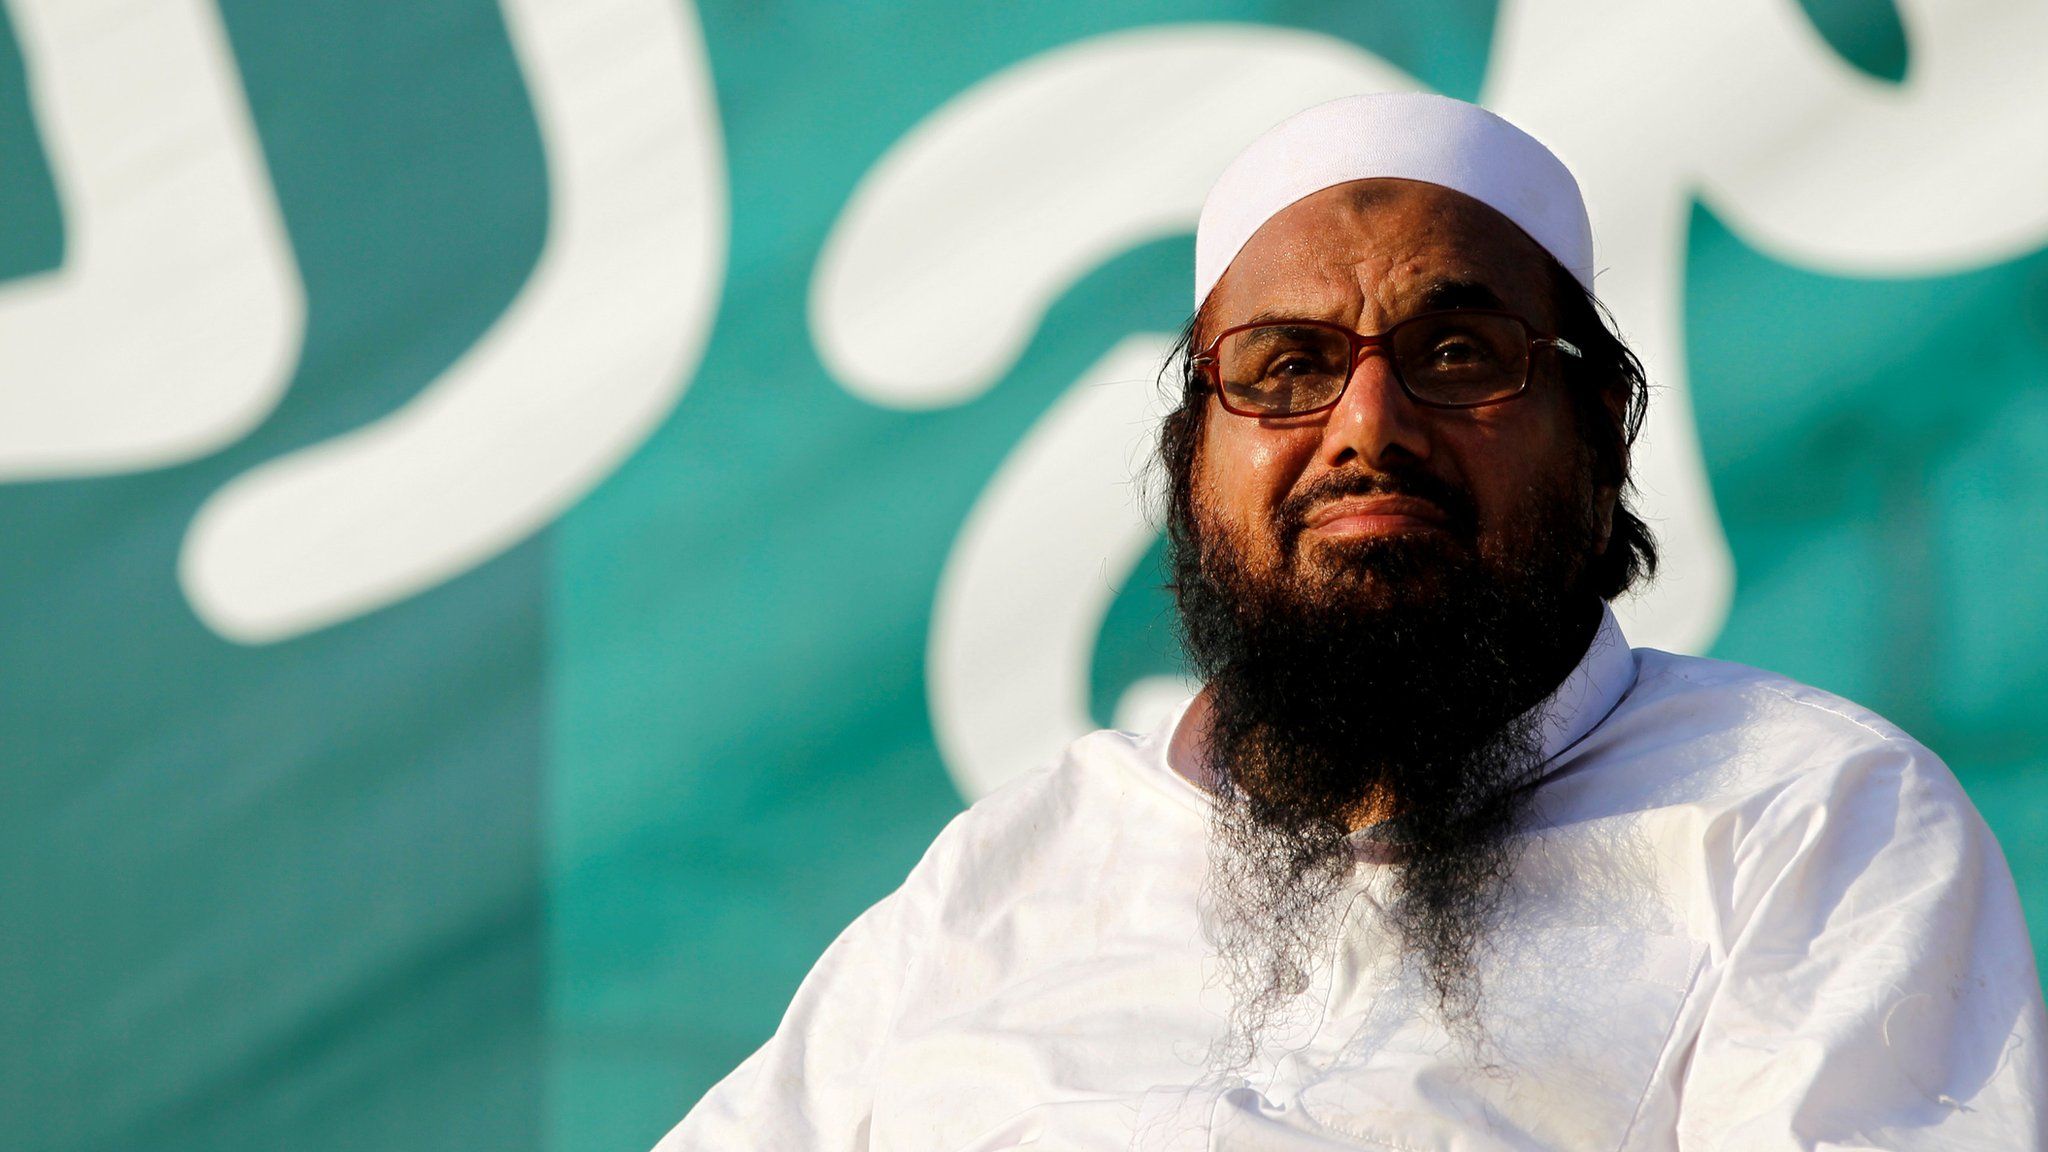 Hafiz Muhammad Saeed, chief of the banned Islamic charity Jamat-ud-Dawa, looks over the crowed as they end a "Kashmir Caravan" from Lahore with a protest in Islamabad, Pakistan on 20 July 2016